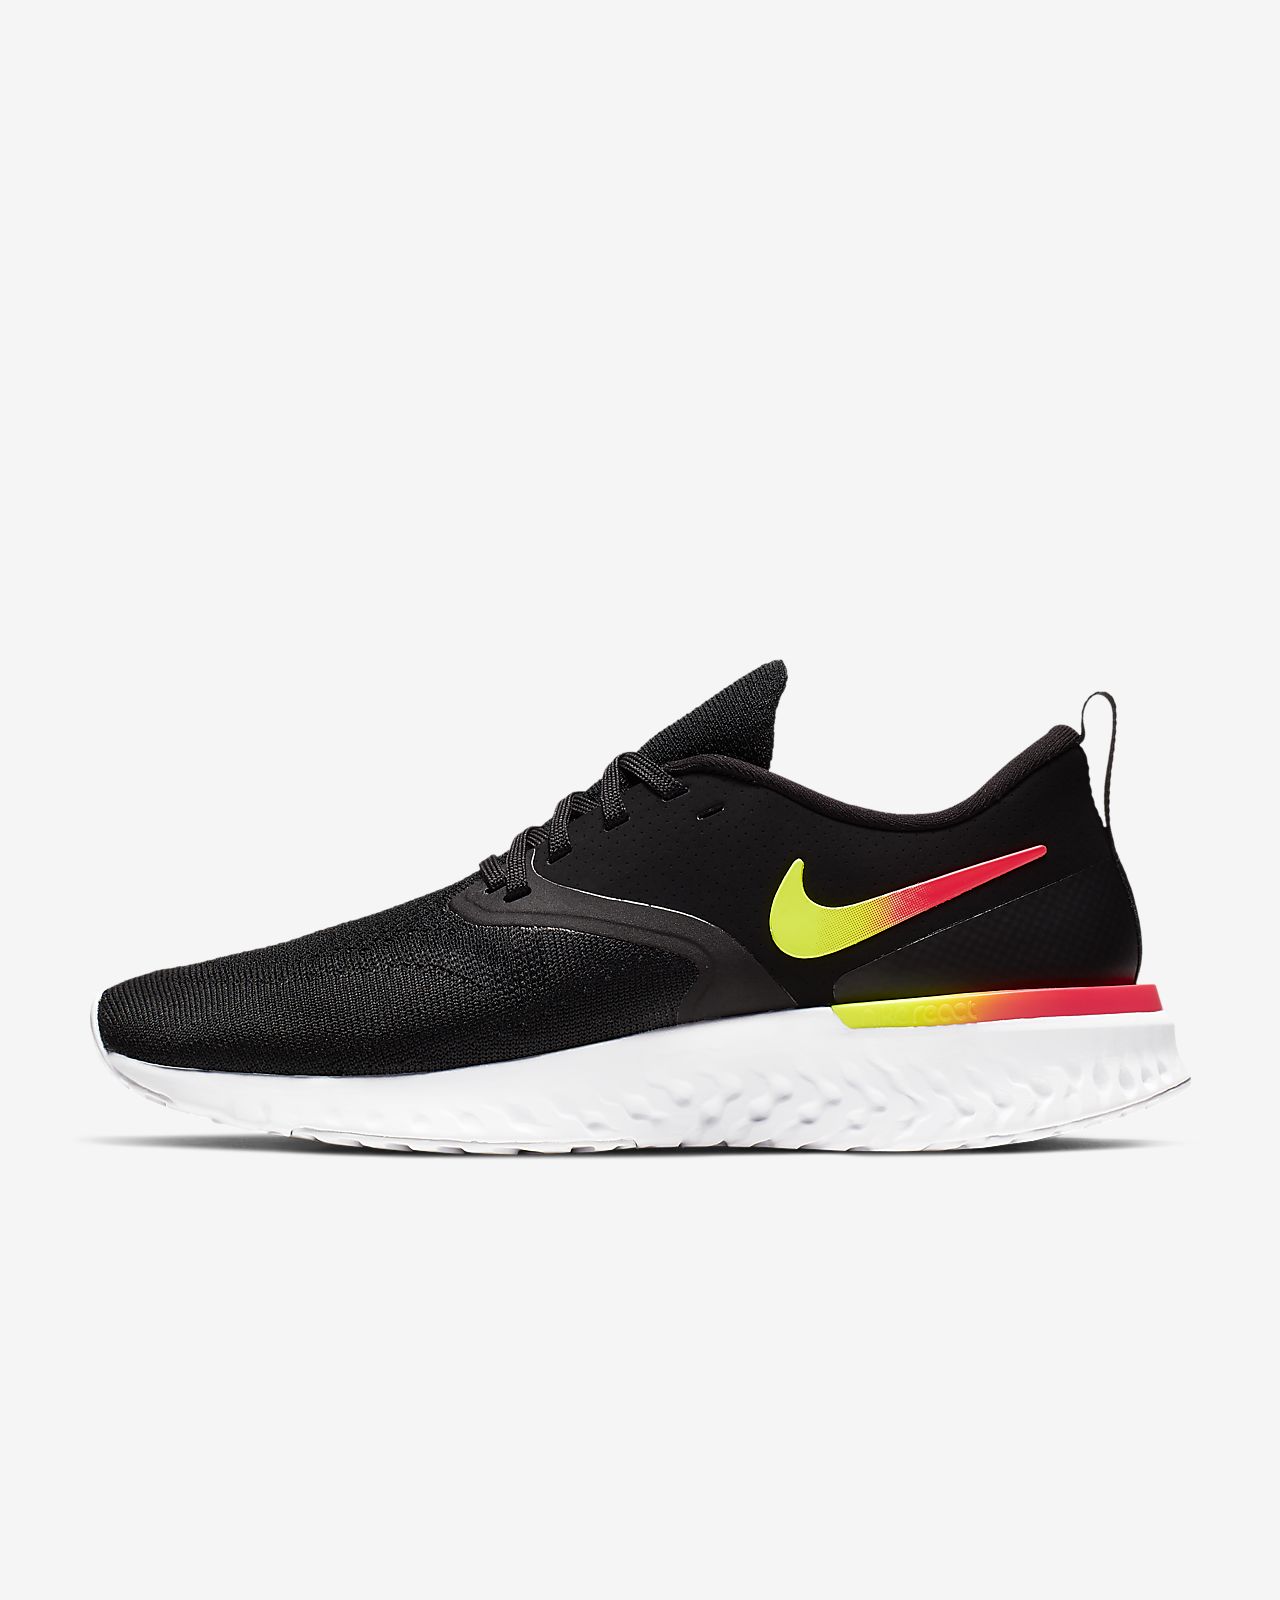 Odyssey React Flyknit 2 Mujer Hotsell, OFF |